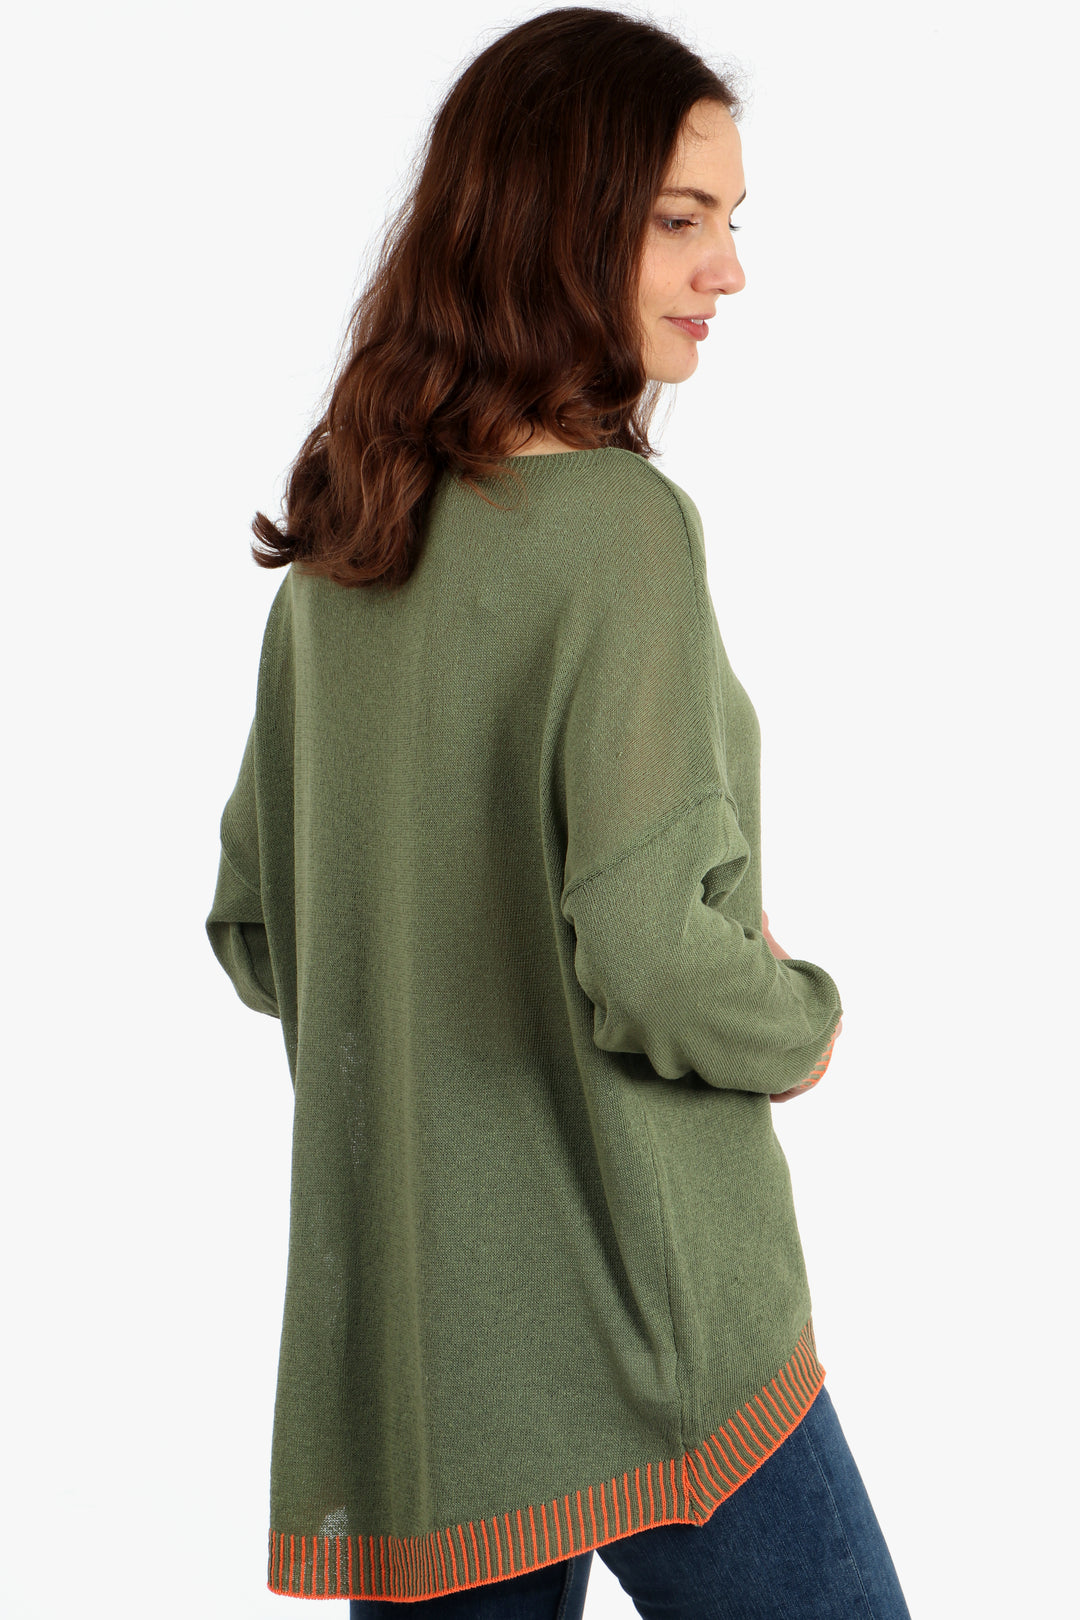 model showing the back of the jumper, showing the dip hem design where the jumper is longer at the back than the front